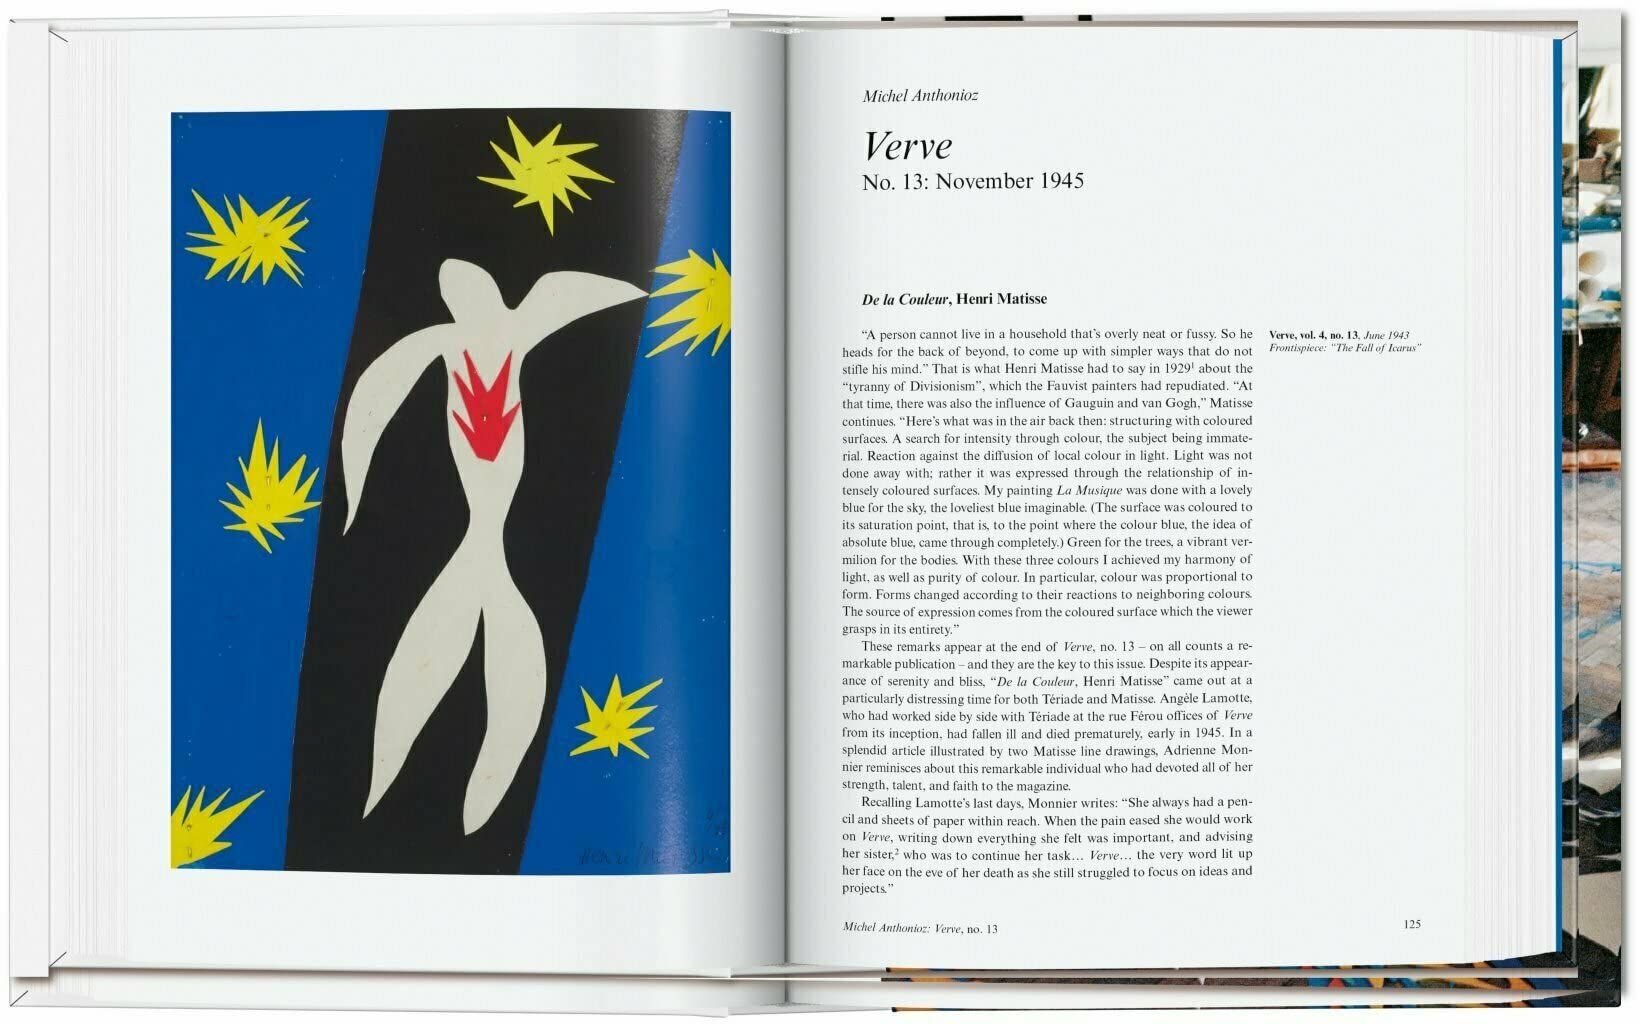  Matisse. Cut-outs 